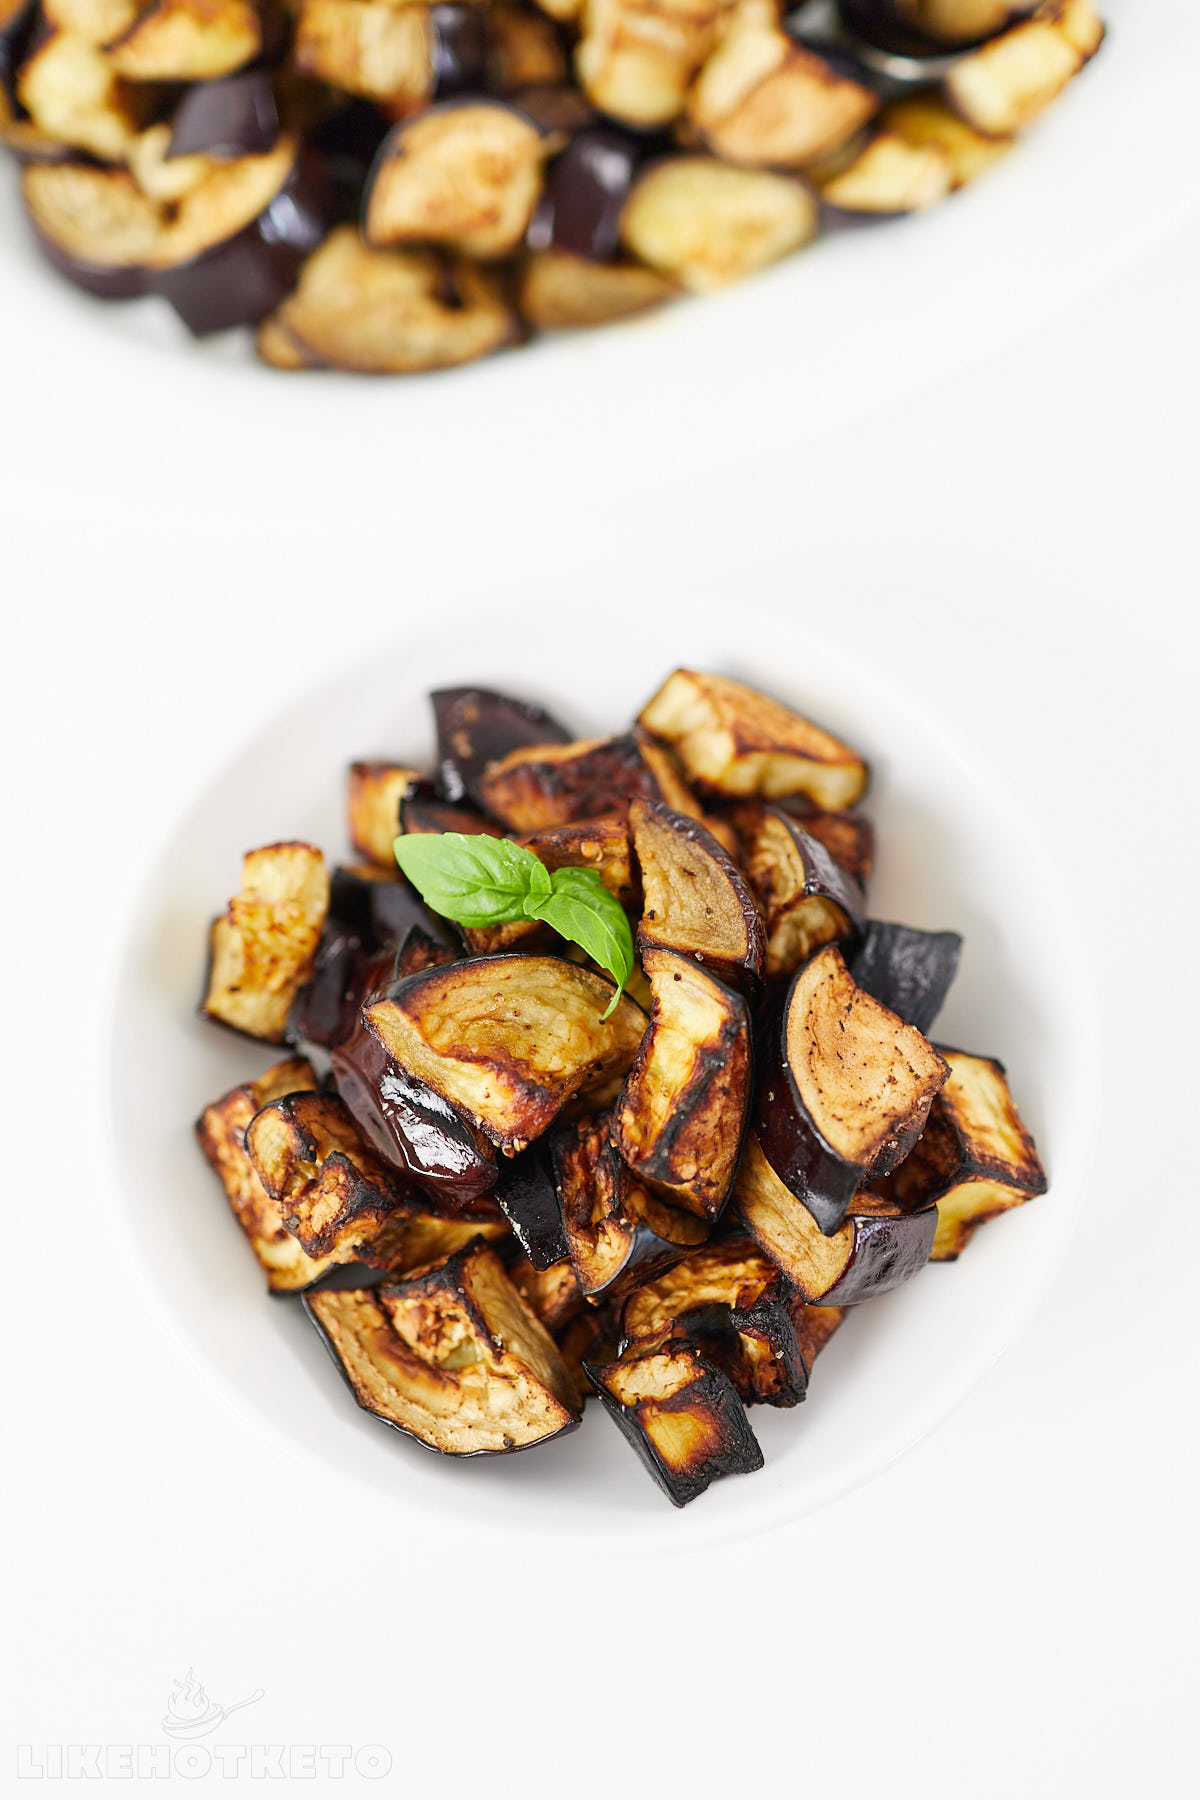 Oven roasted, golden brown pieces of eggplant.